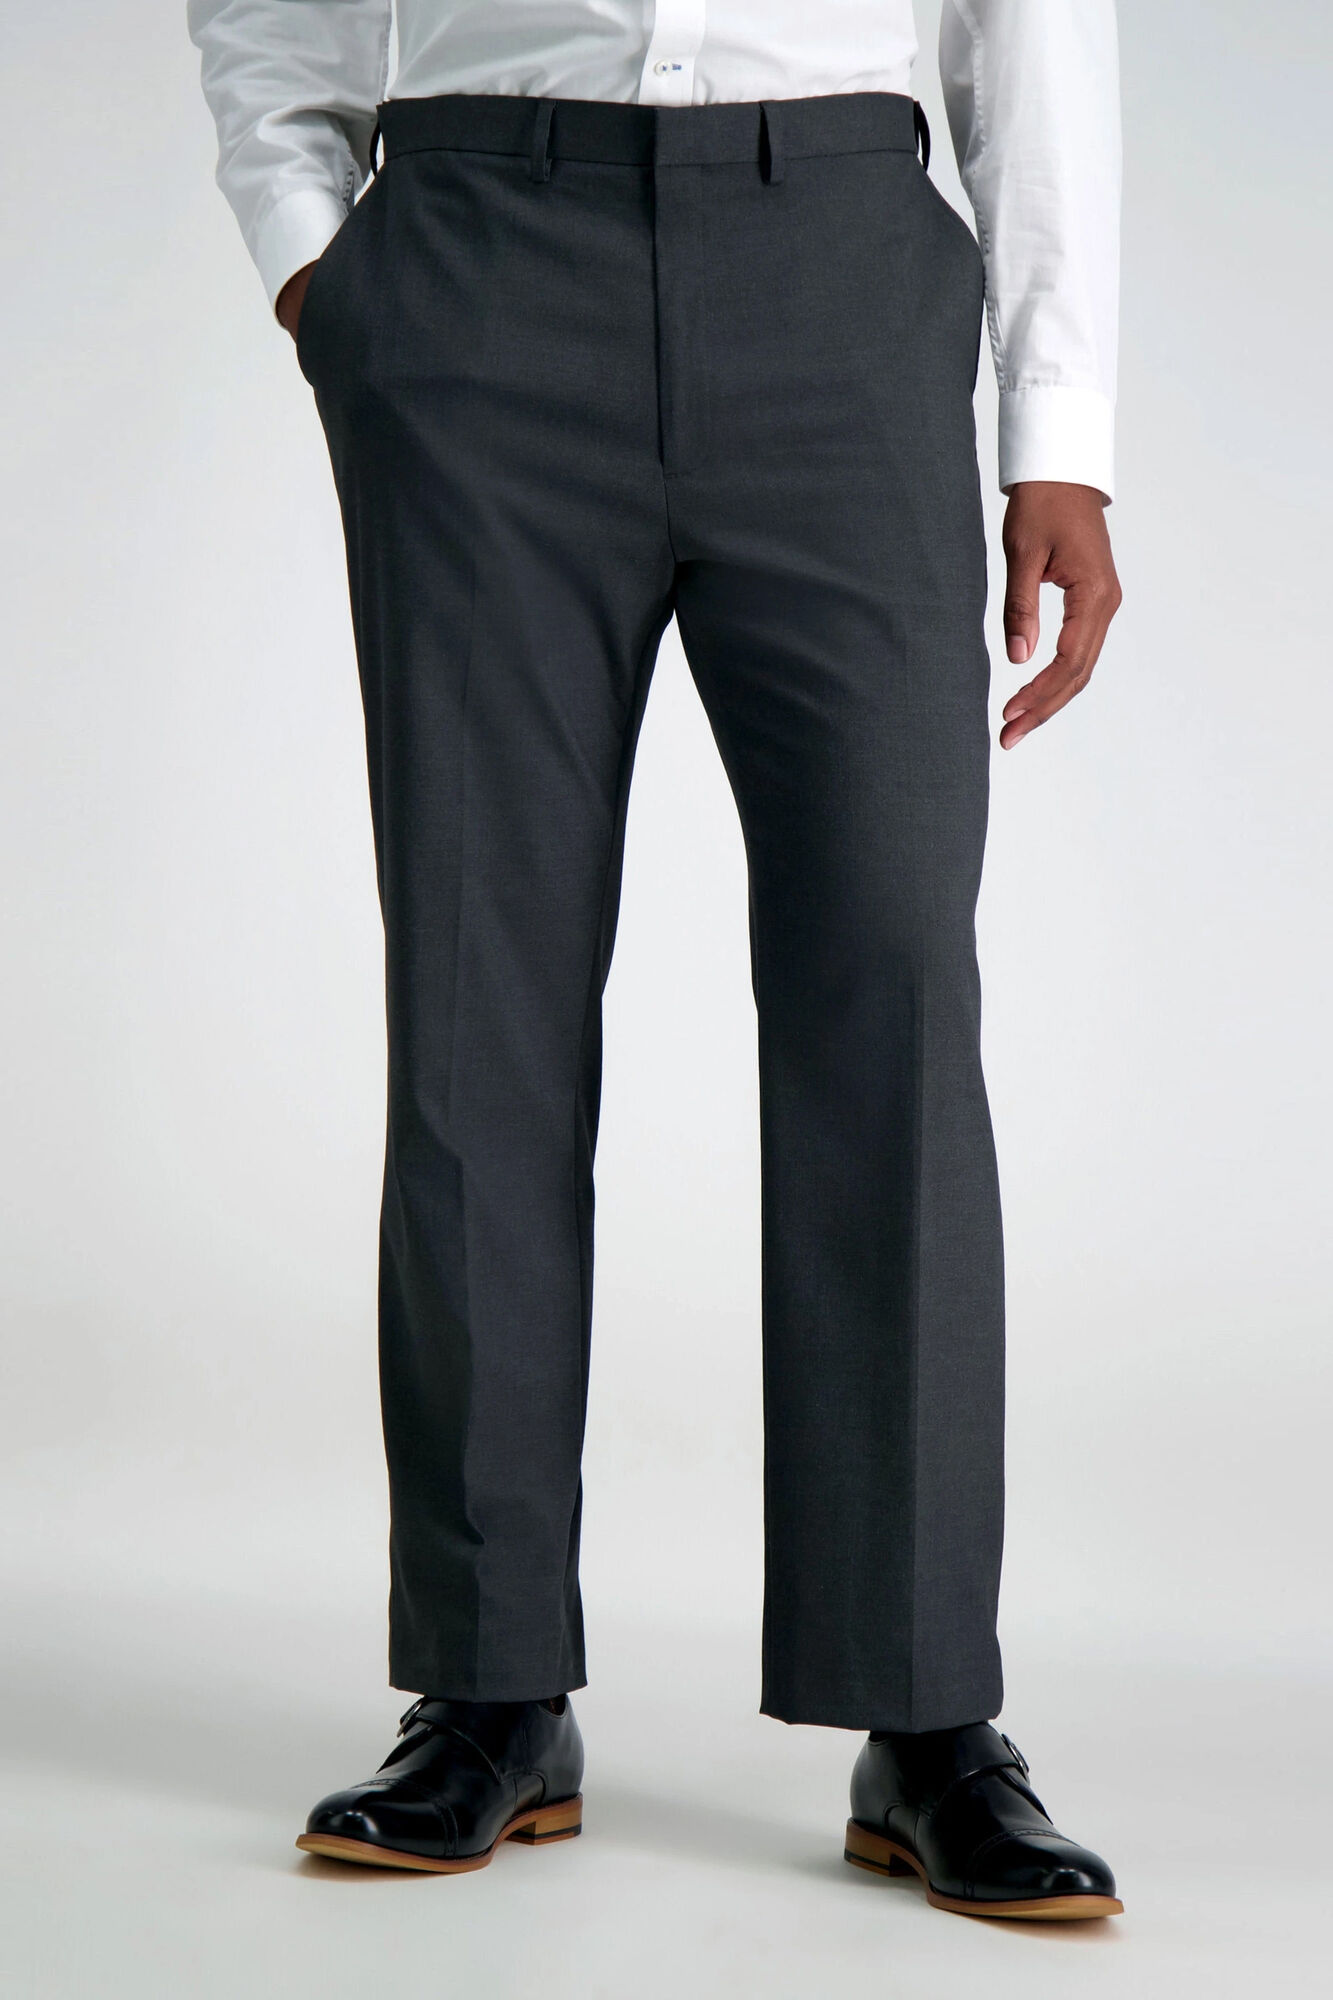 Big & Tall J.M. Haggar Premium Stretch Suit Pant - Flat Front Dark Heather Grey Big & Tall Classic Fit Flat Front Hidden Expandable Waistband: Expands up to 3" 64% Polyester, 34% Viscoe Rayon 2% Spandex Dry Clean Only Imported Style #: HY90182 Size - NoSz